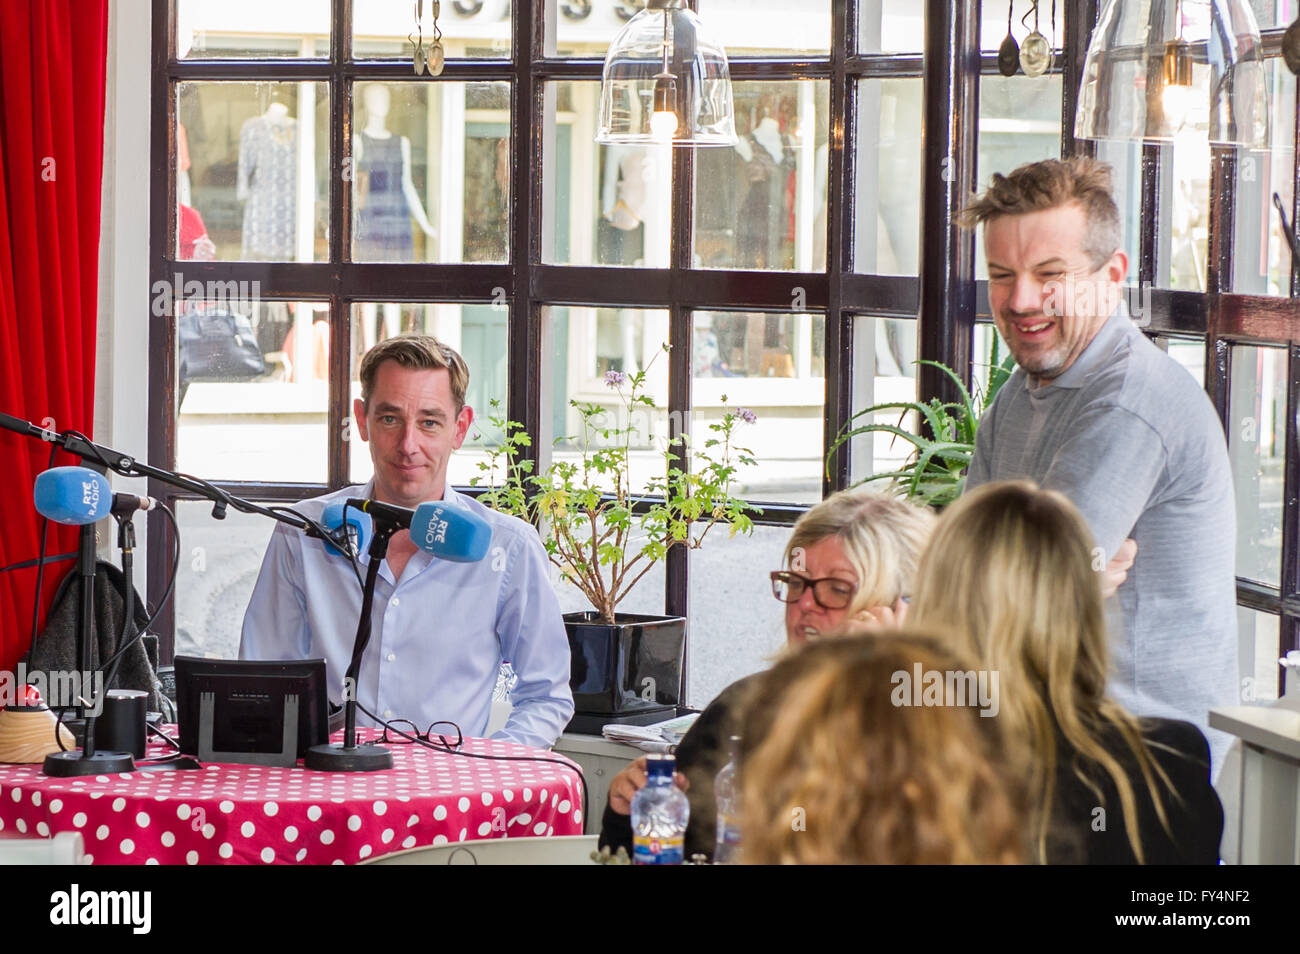 RTE star Ryan Tubridy takes time out from presenting his radio show in the Good Things Cafe in Skibbereen, West Cork, Ireland. Stock Photo